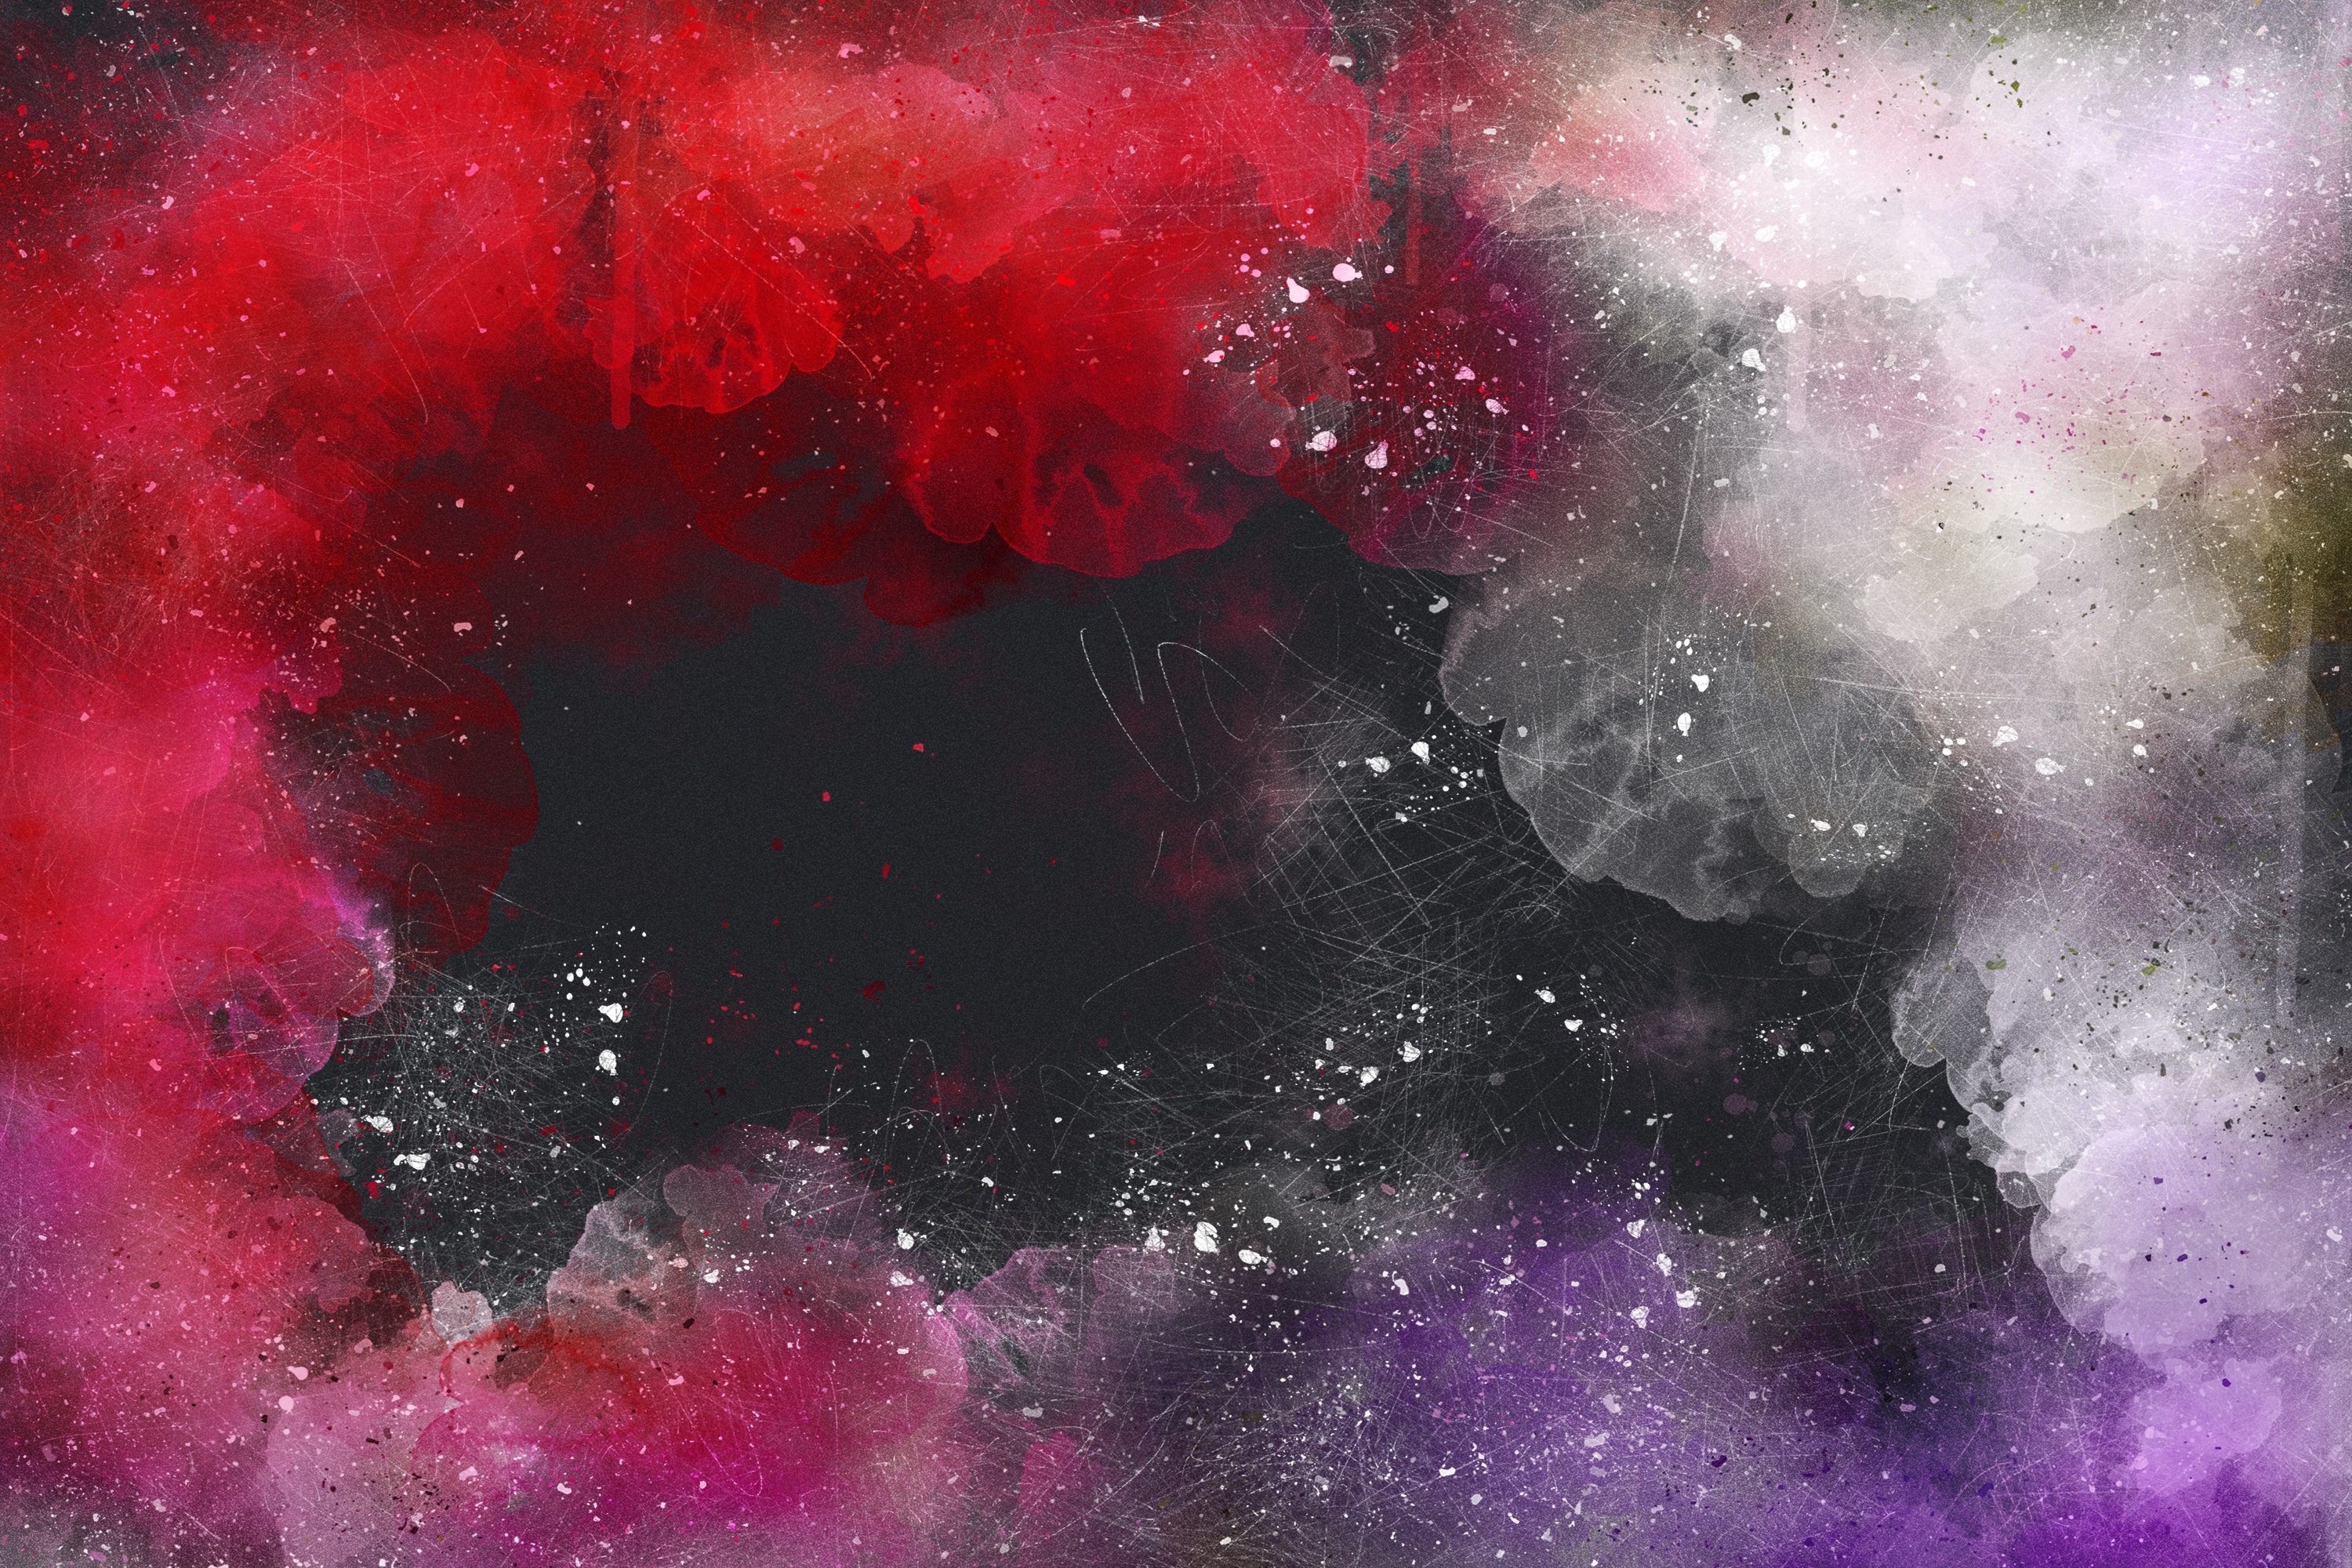 135186 download wallpaper abstract, dark, stains, spots, watercolor screensavers and pictures for free